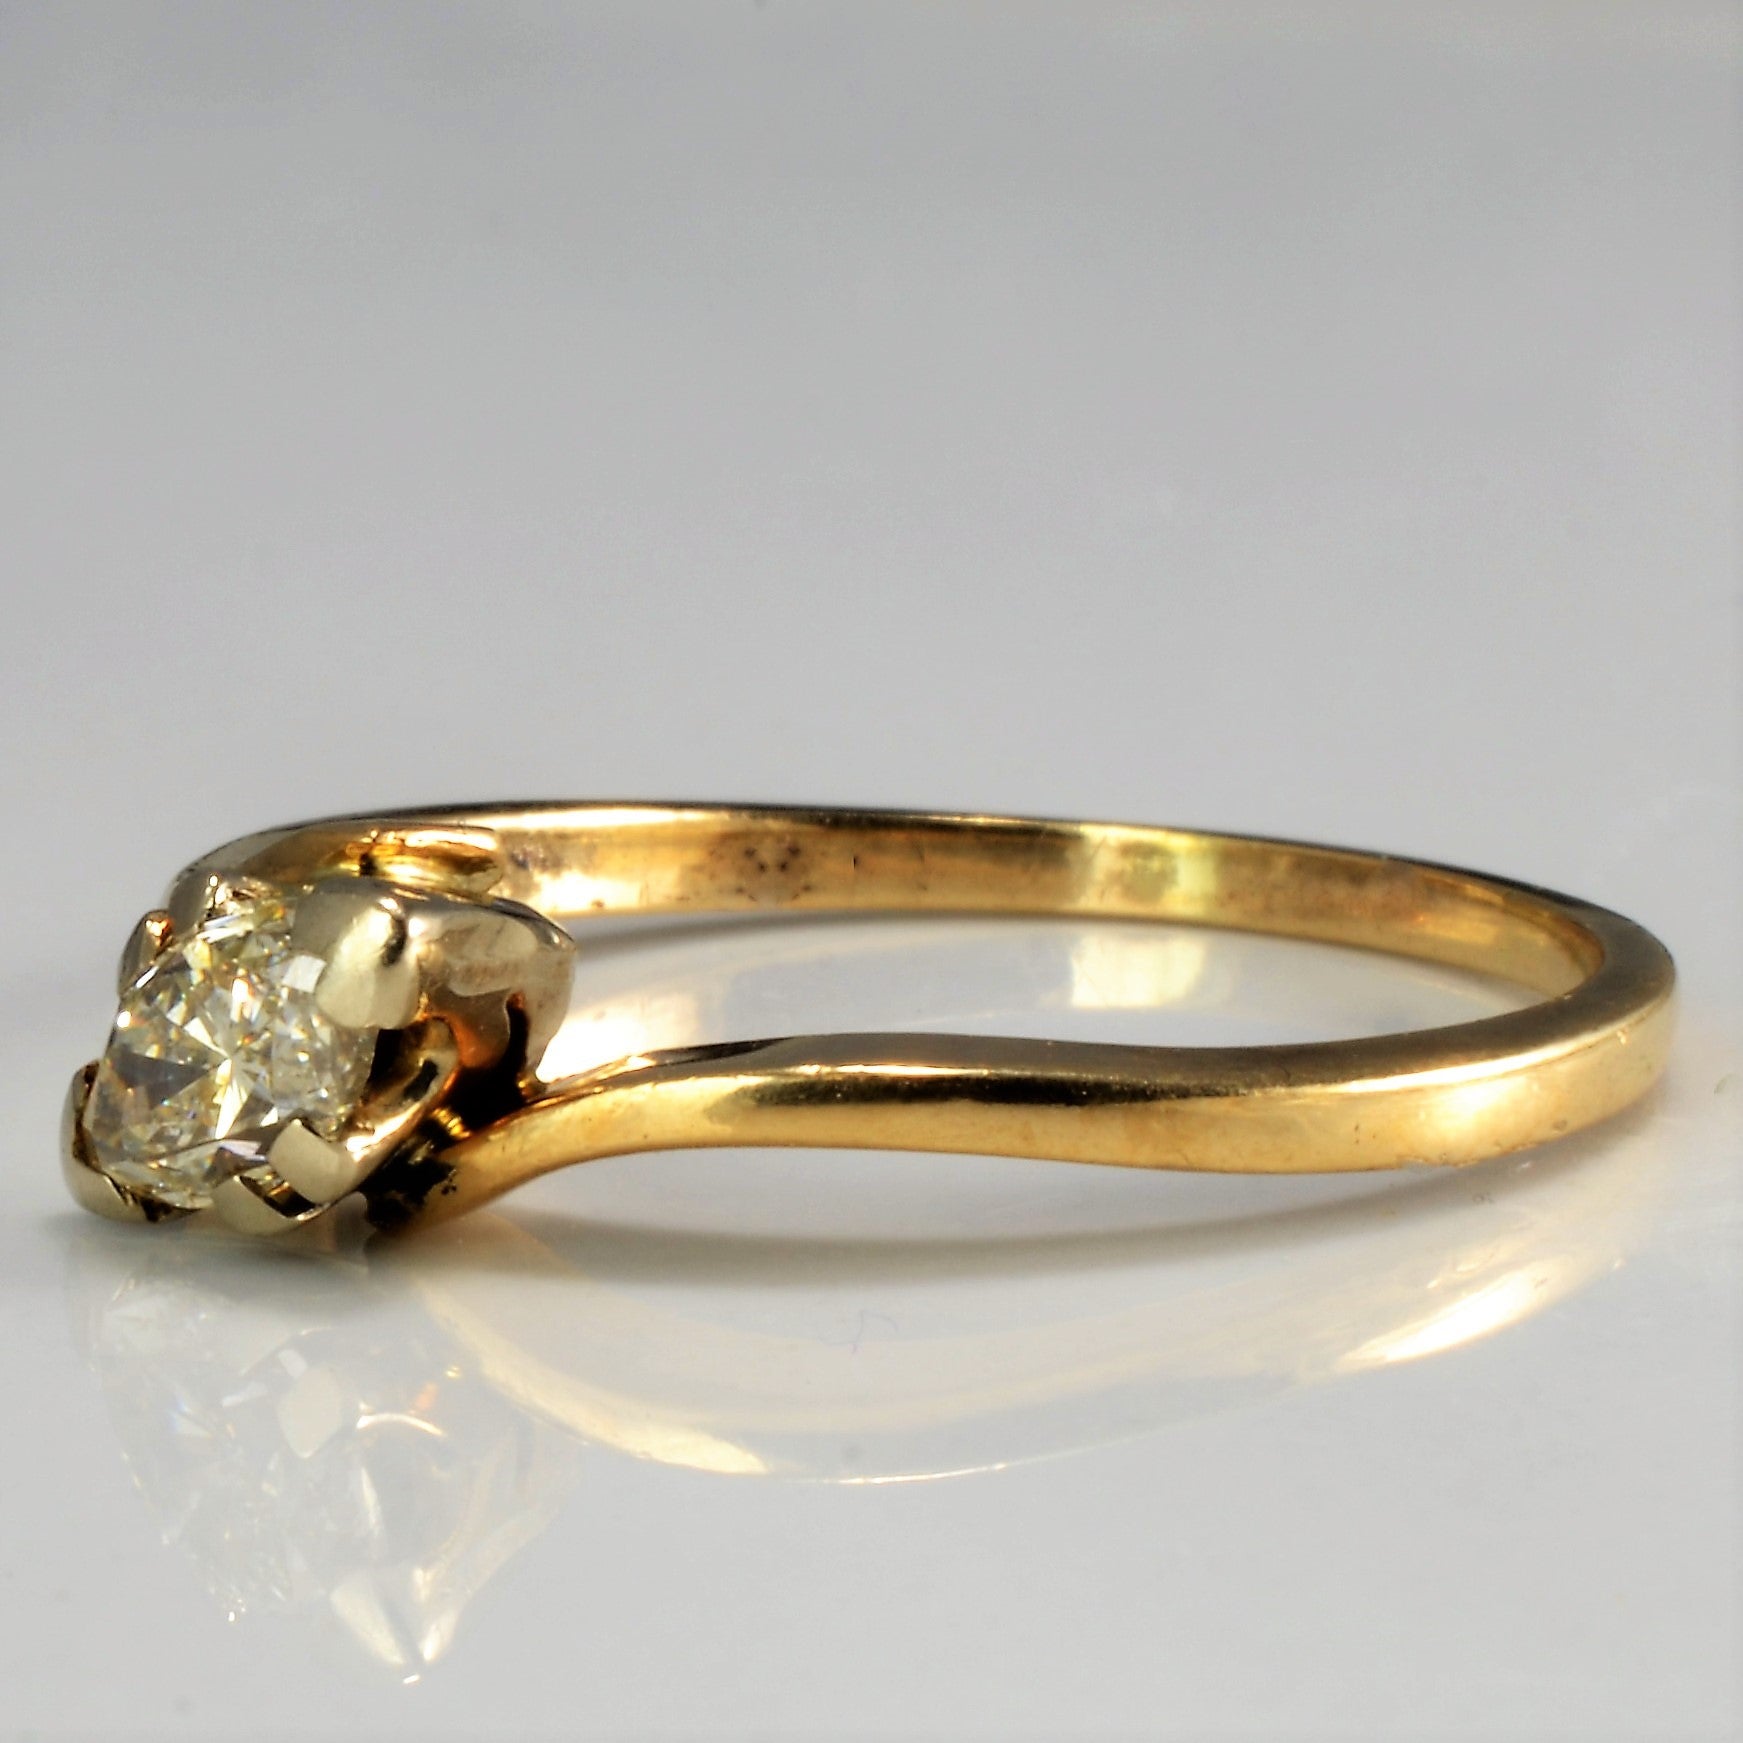 Bypass Solitaire Marquise Diamond Ring | 0.40 ctw, SZ 7.75 |